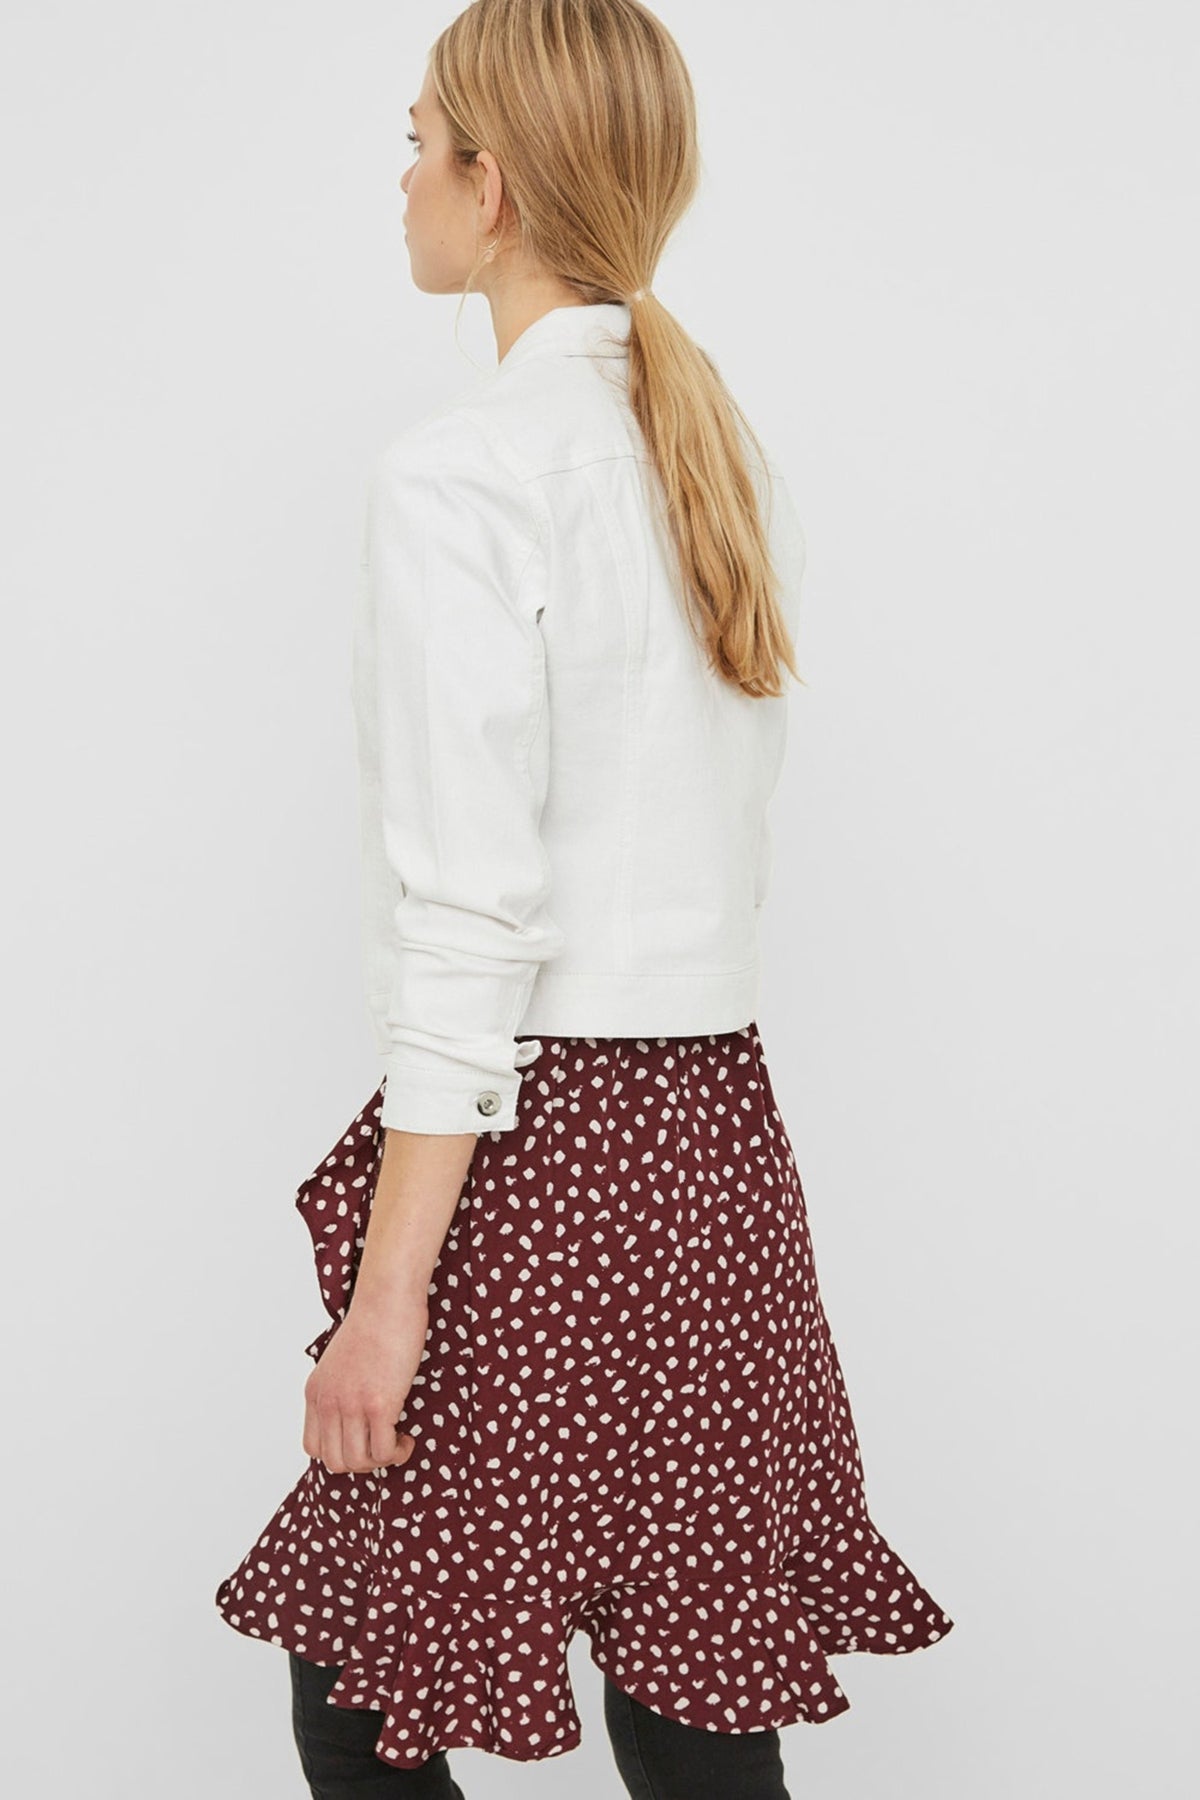 Stylish white jacket for women, long sleeve fitted design, paired with a red patterned skirt, creating a trendy casual outfit.